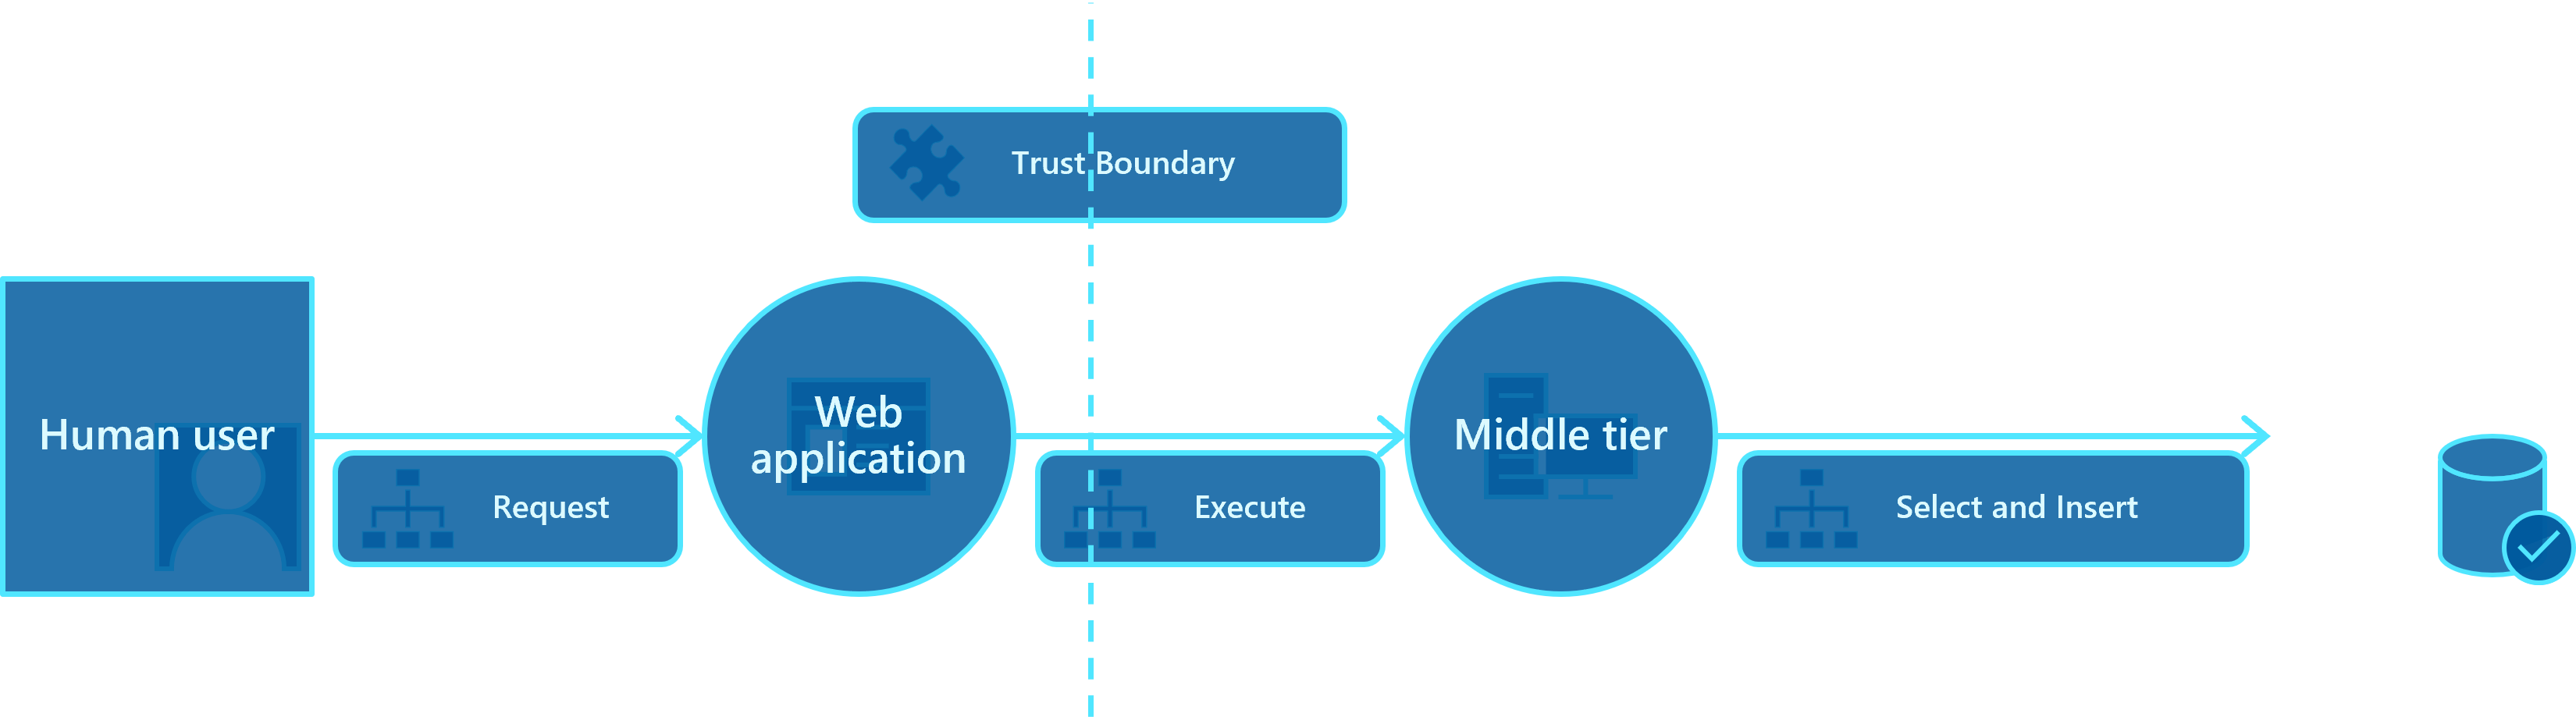 Diagram showing data flow diagram with basic threat model.